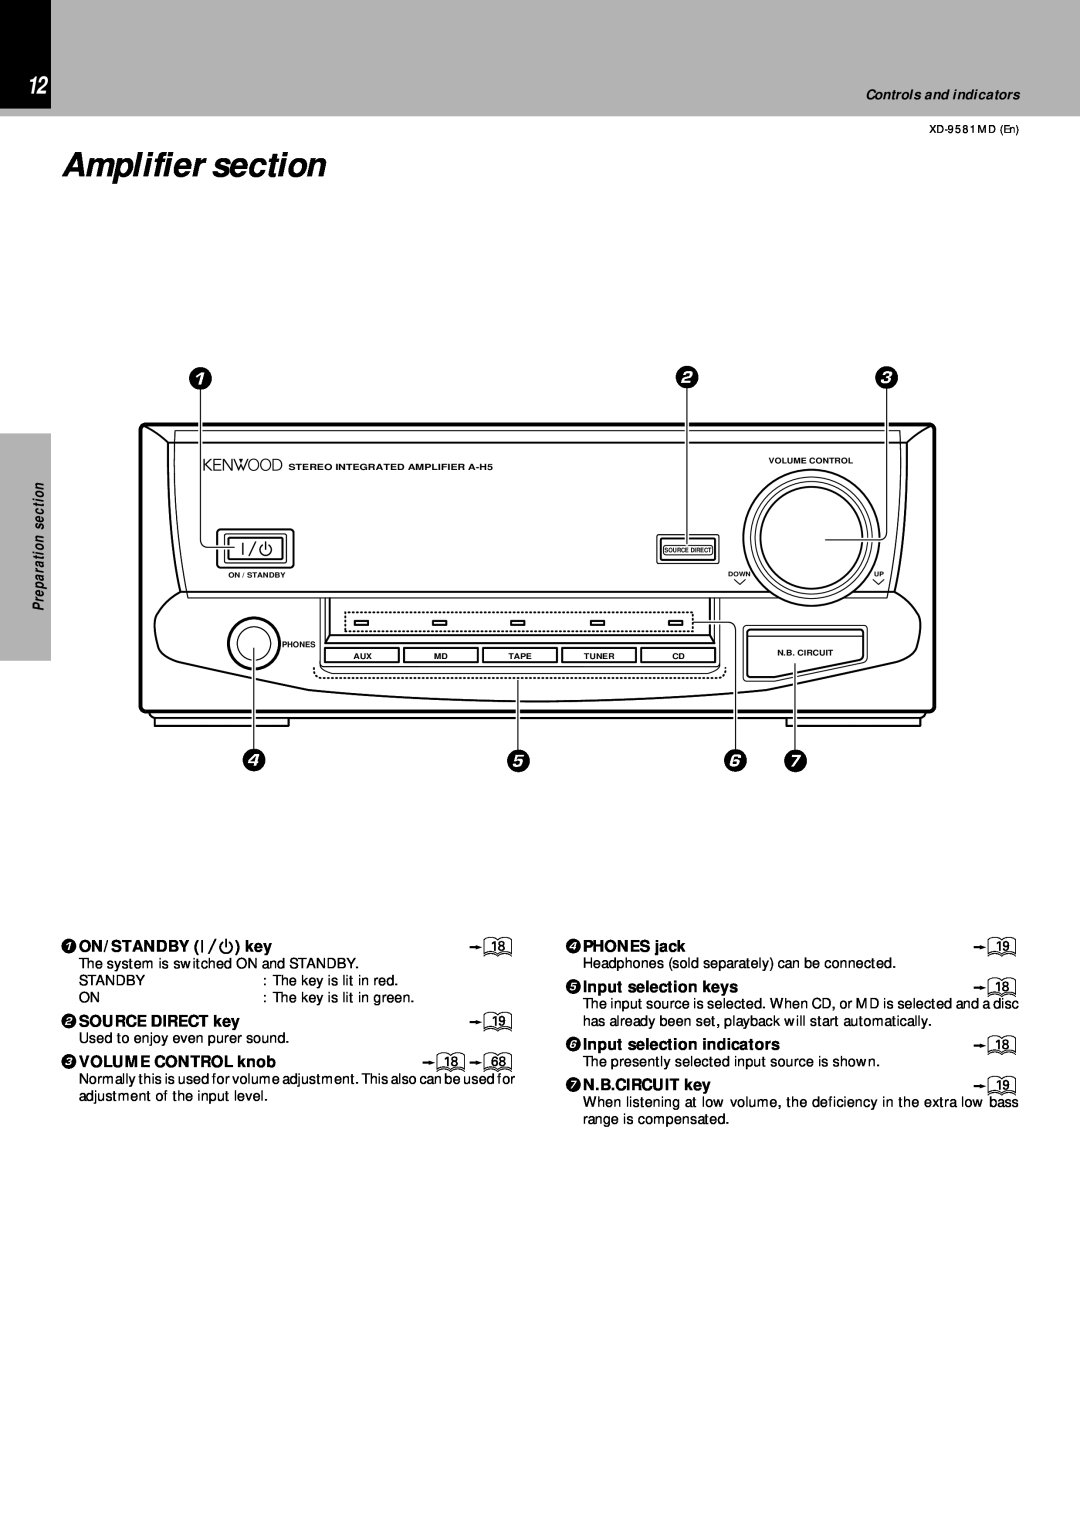 Kenwood XD-9581MD Amplifier section, Controls and indicators, Preparation section Basic section, Application section 